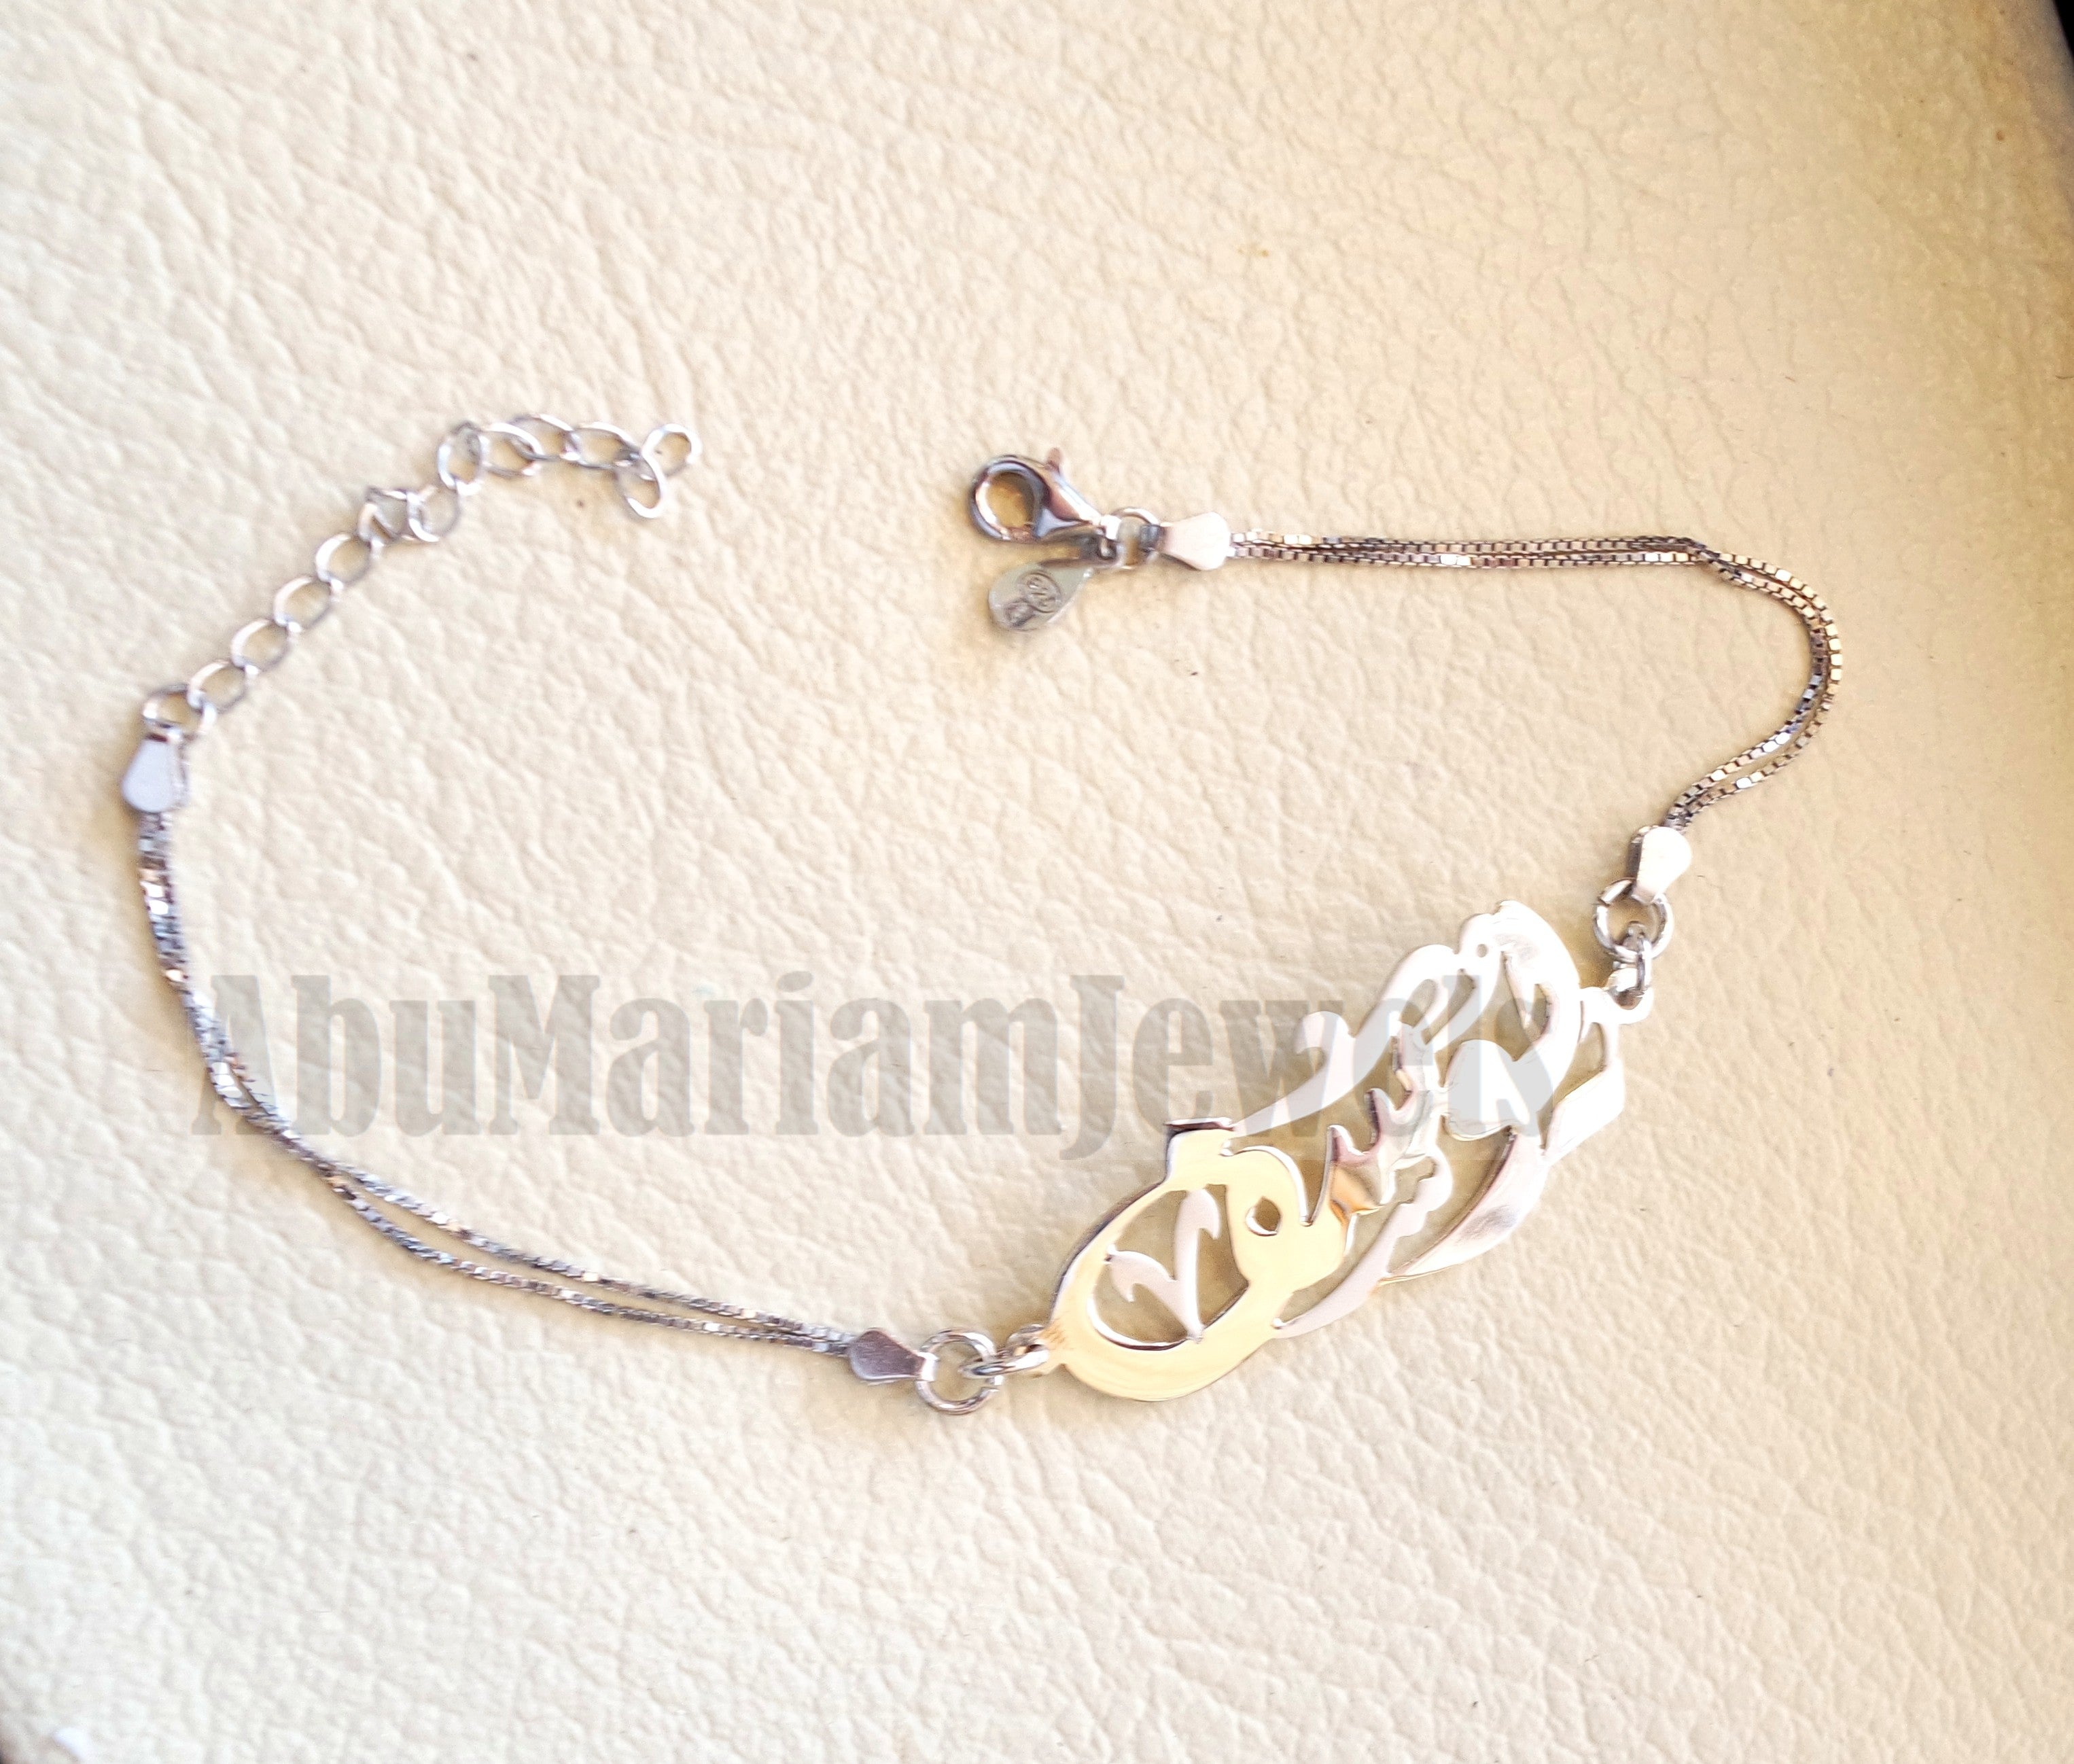 arabic calligraphy customized name sterling silver 925 high quality bracelet , fit all sizes any one name BR002 اسوارة اسماء عربي